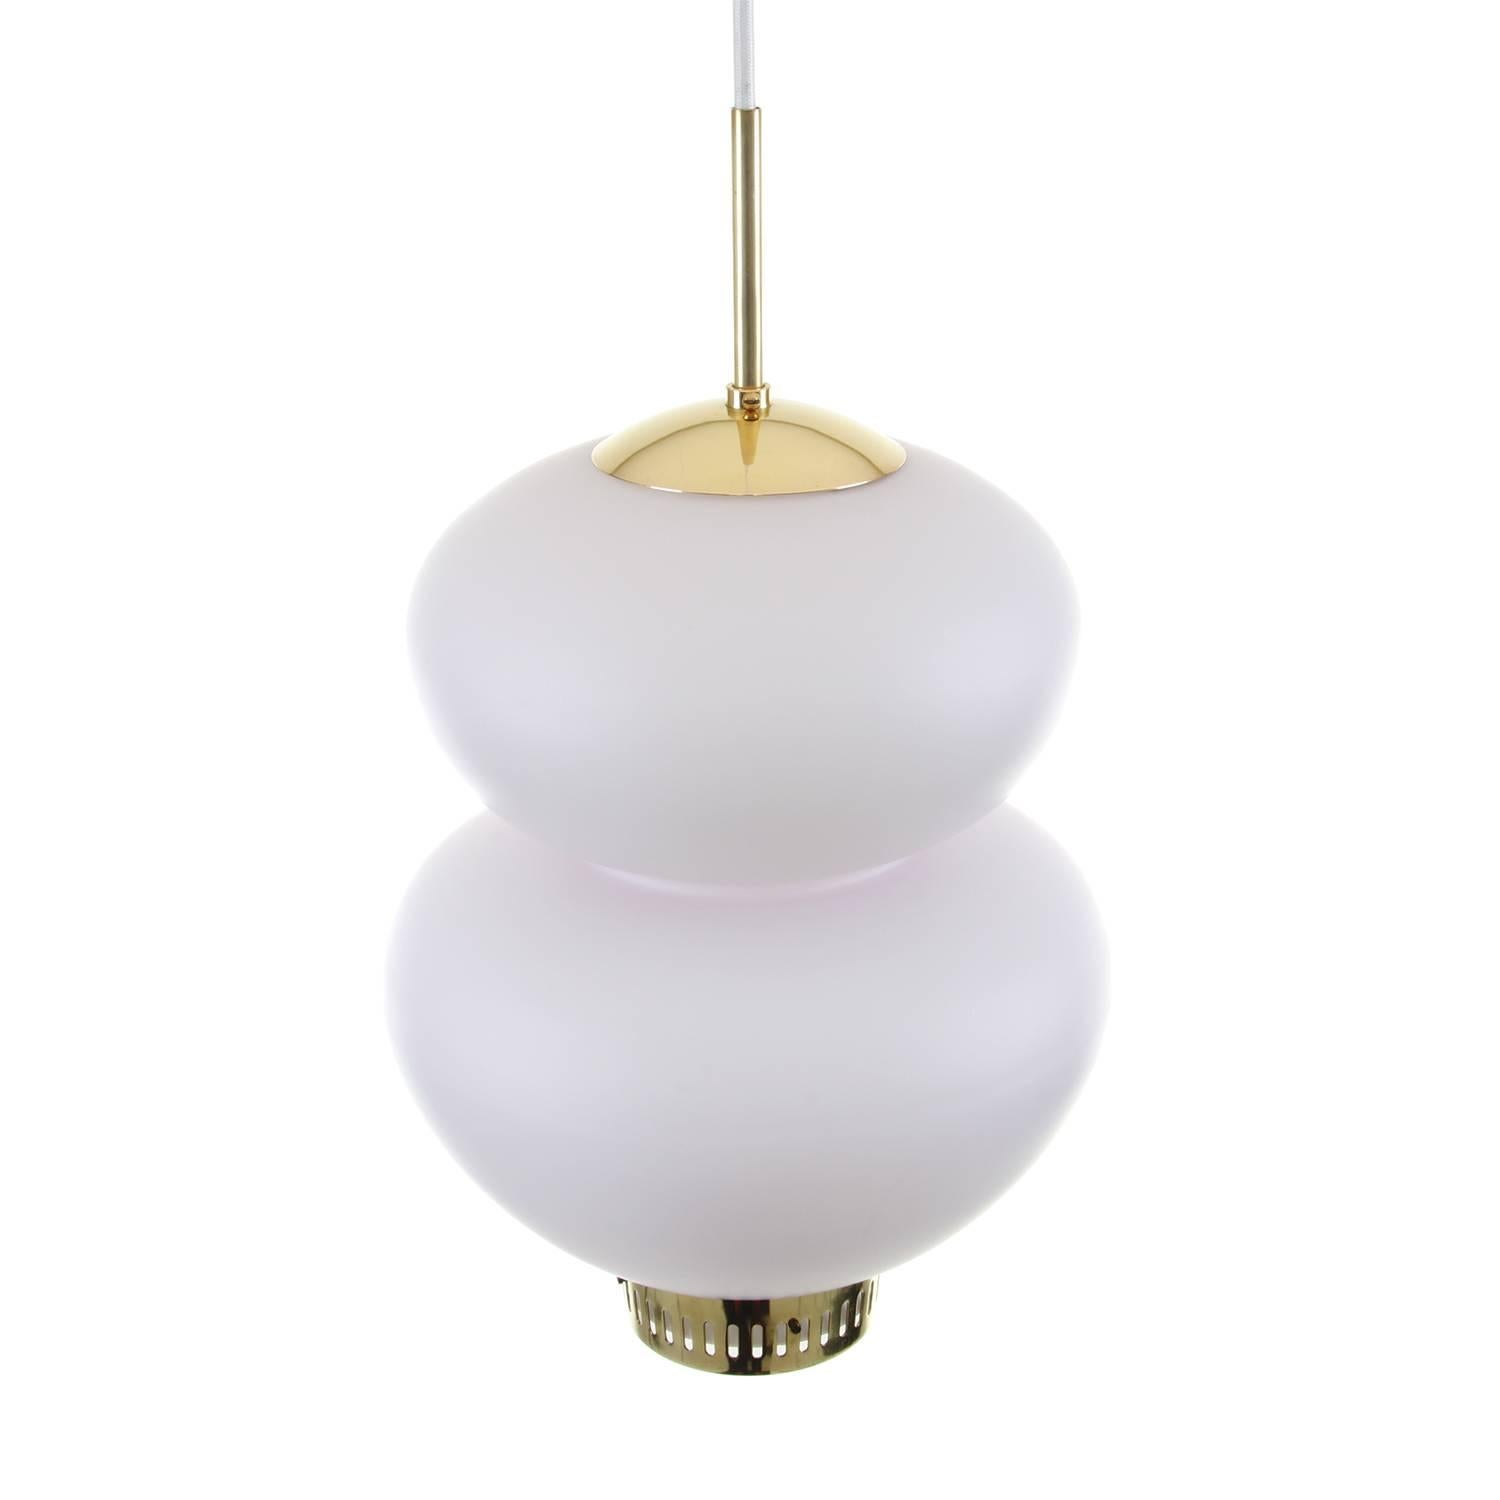 Polished Peanut, Pendant Lighting by Bent Karlby, 1946, Lyfa Large Opal and Brass Light For Sale